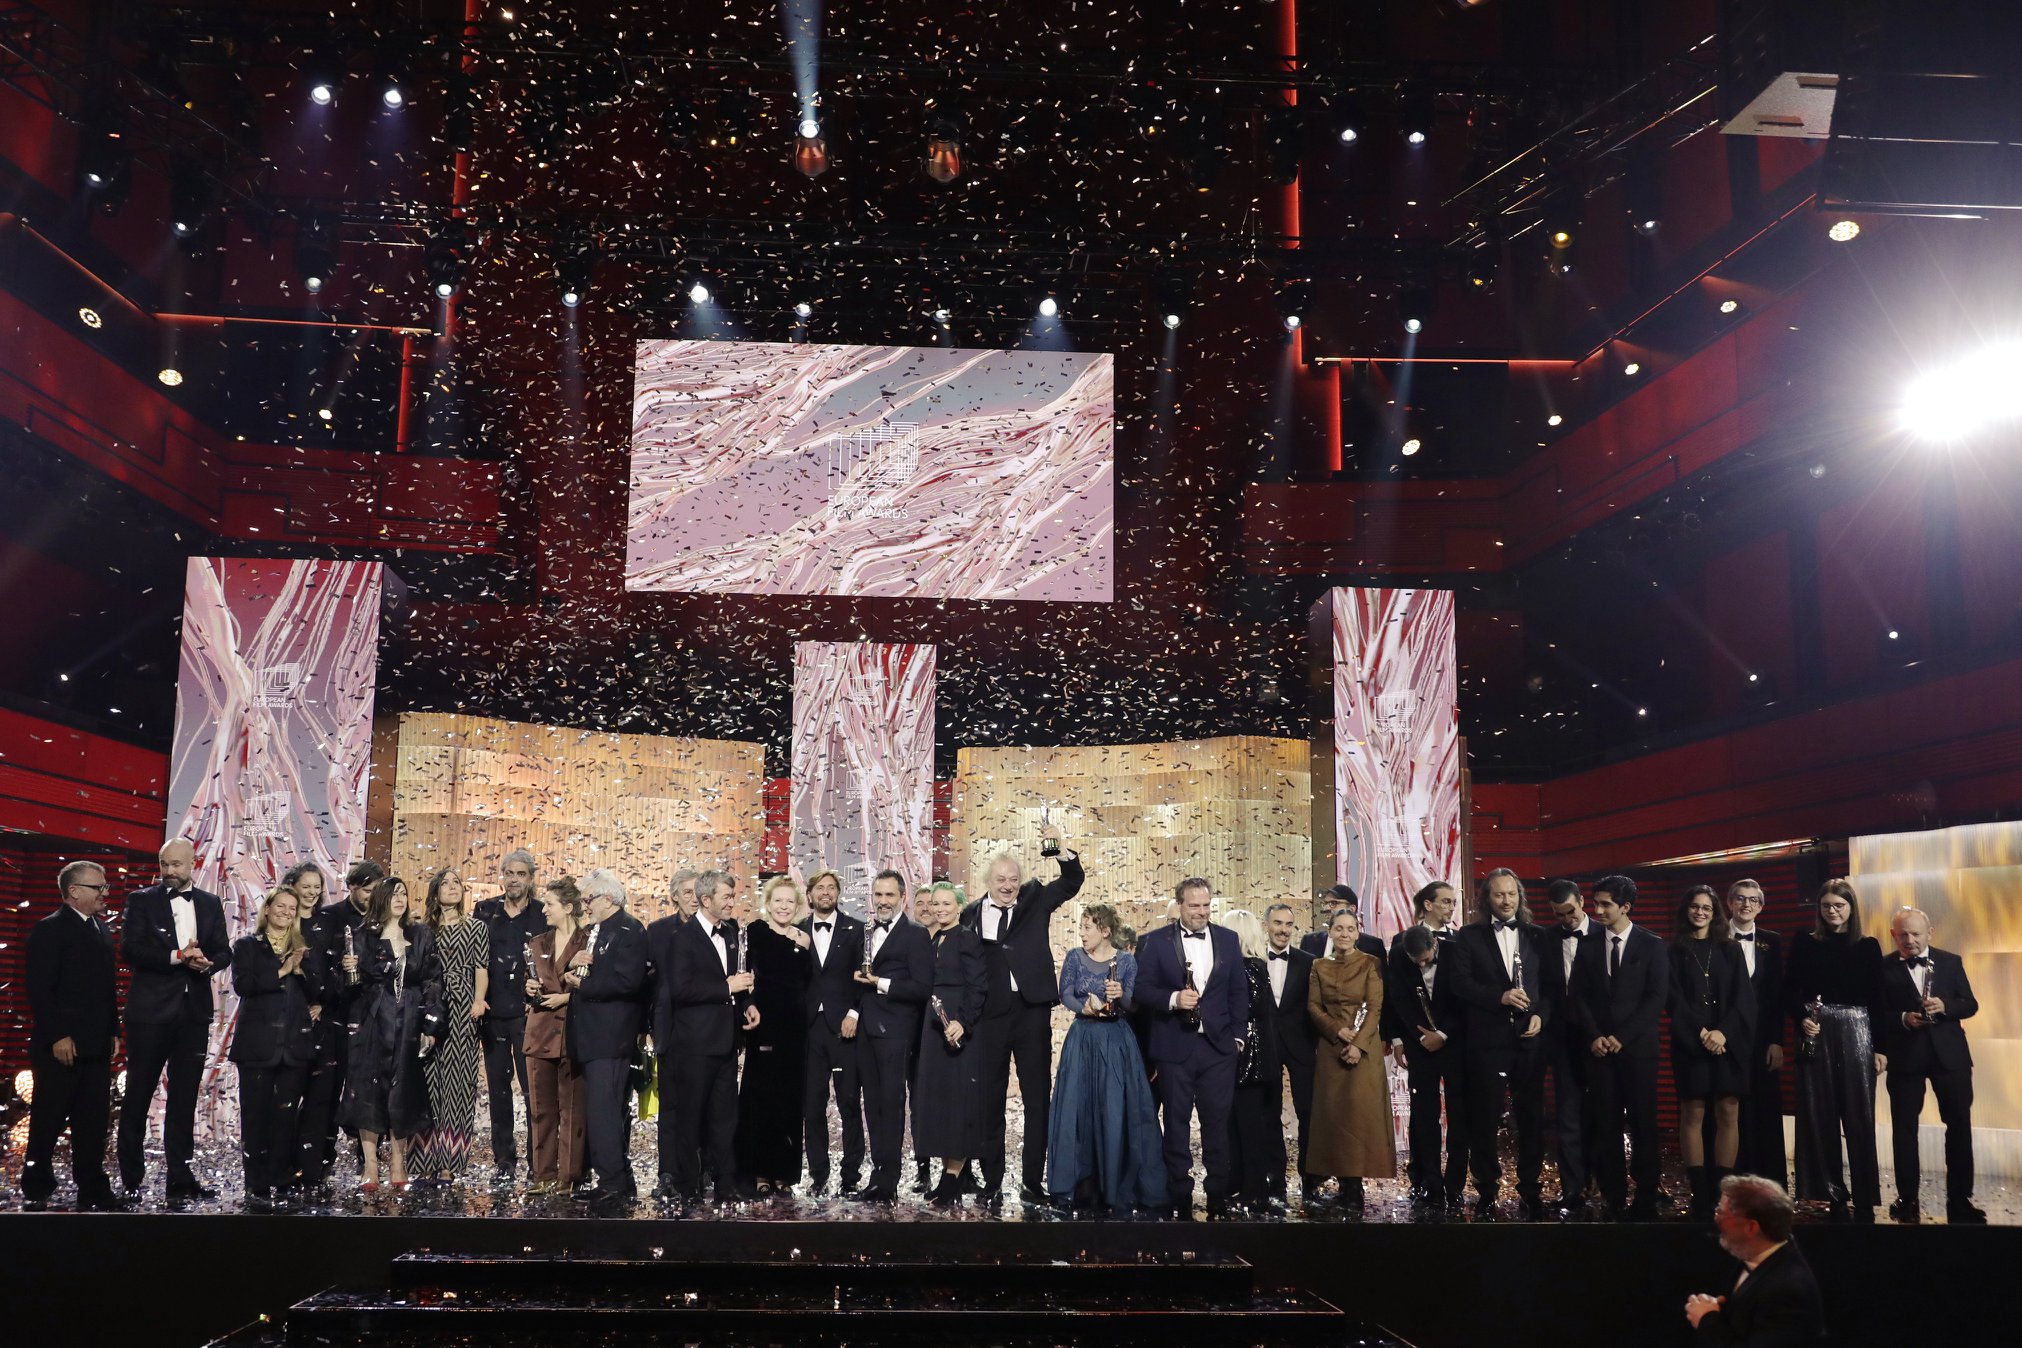 THE 35TH EUROPEAN FILM AWARDS TO BE LIVESTREAMED ON OUR WEBPAGE